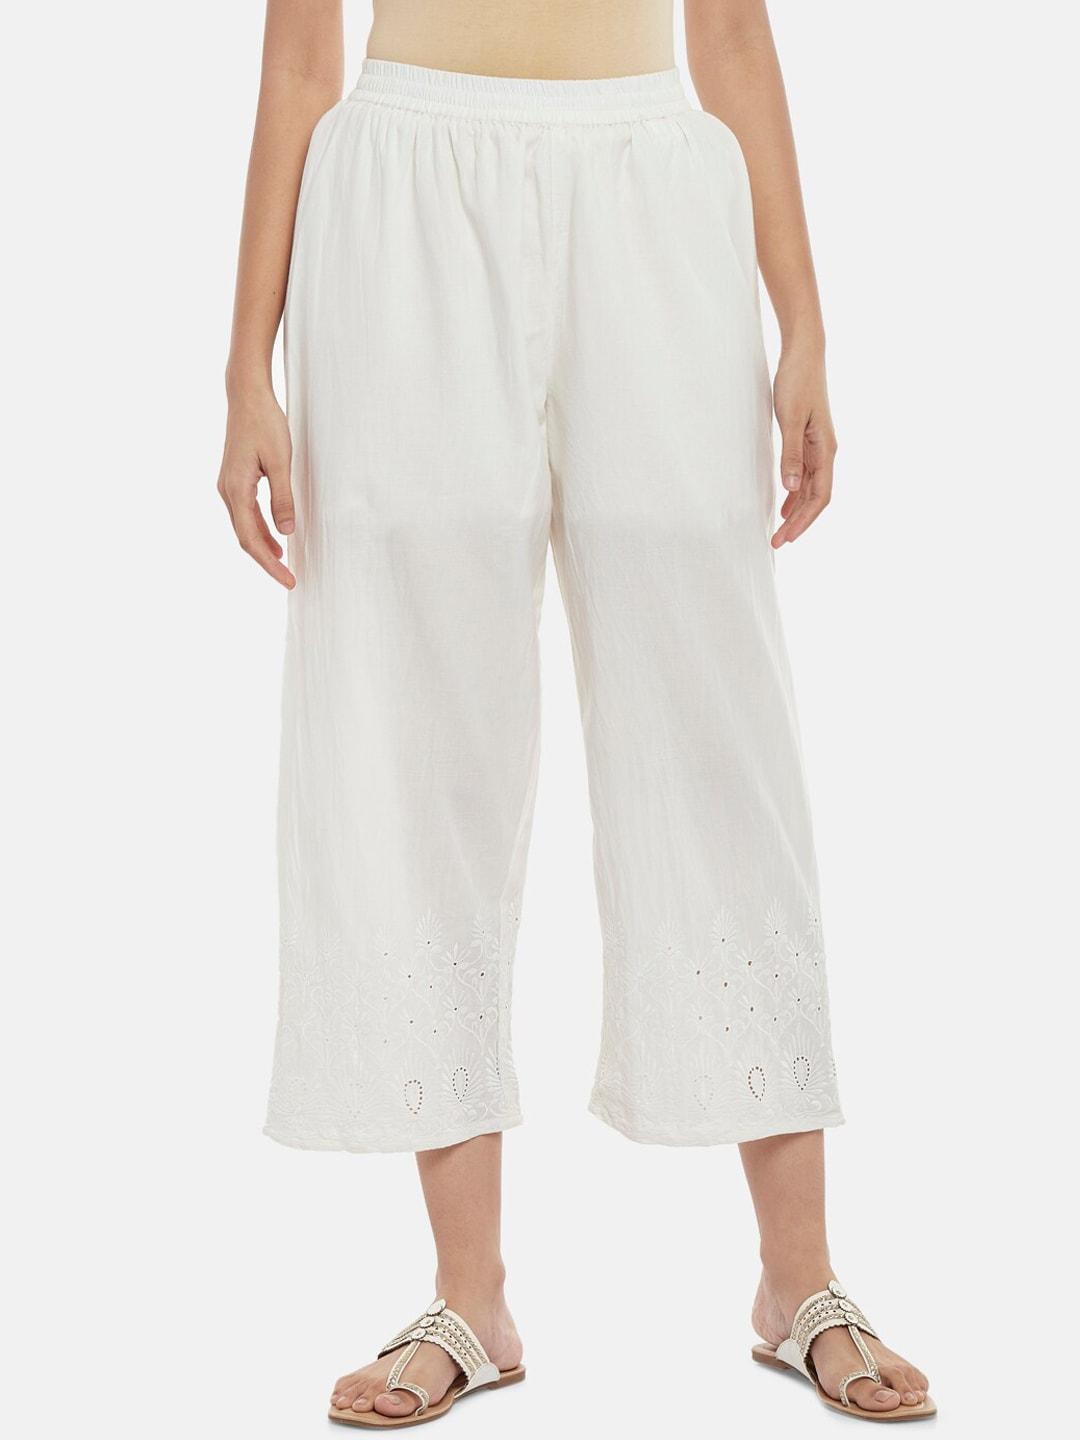 RANGMANCH BY PANTALOONS Women Off White Embroidered Culottes Trouser